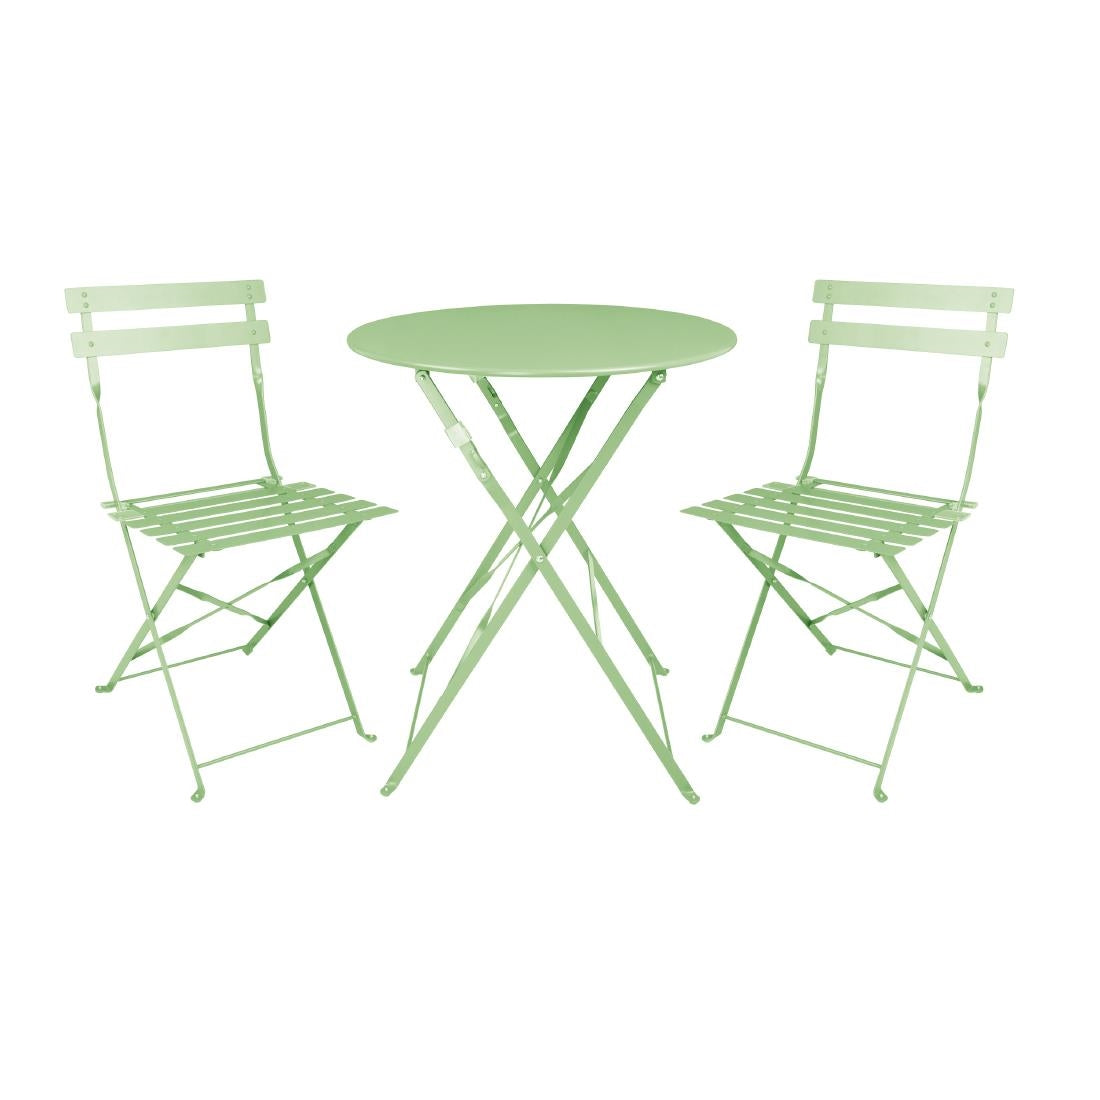 FT270 Bolero Pavement Style Steel Folding Chairs Light Green (Pack of 2) JD Catering Equipment Solutions Ltd